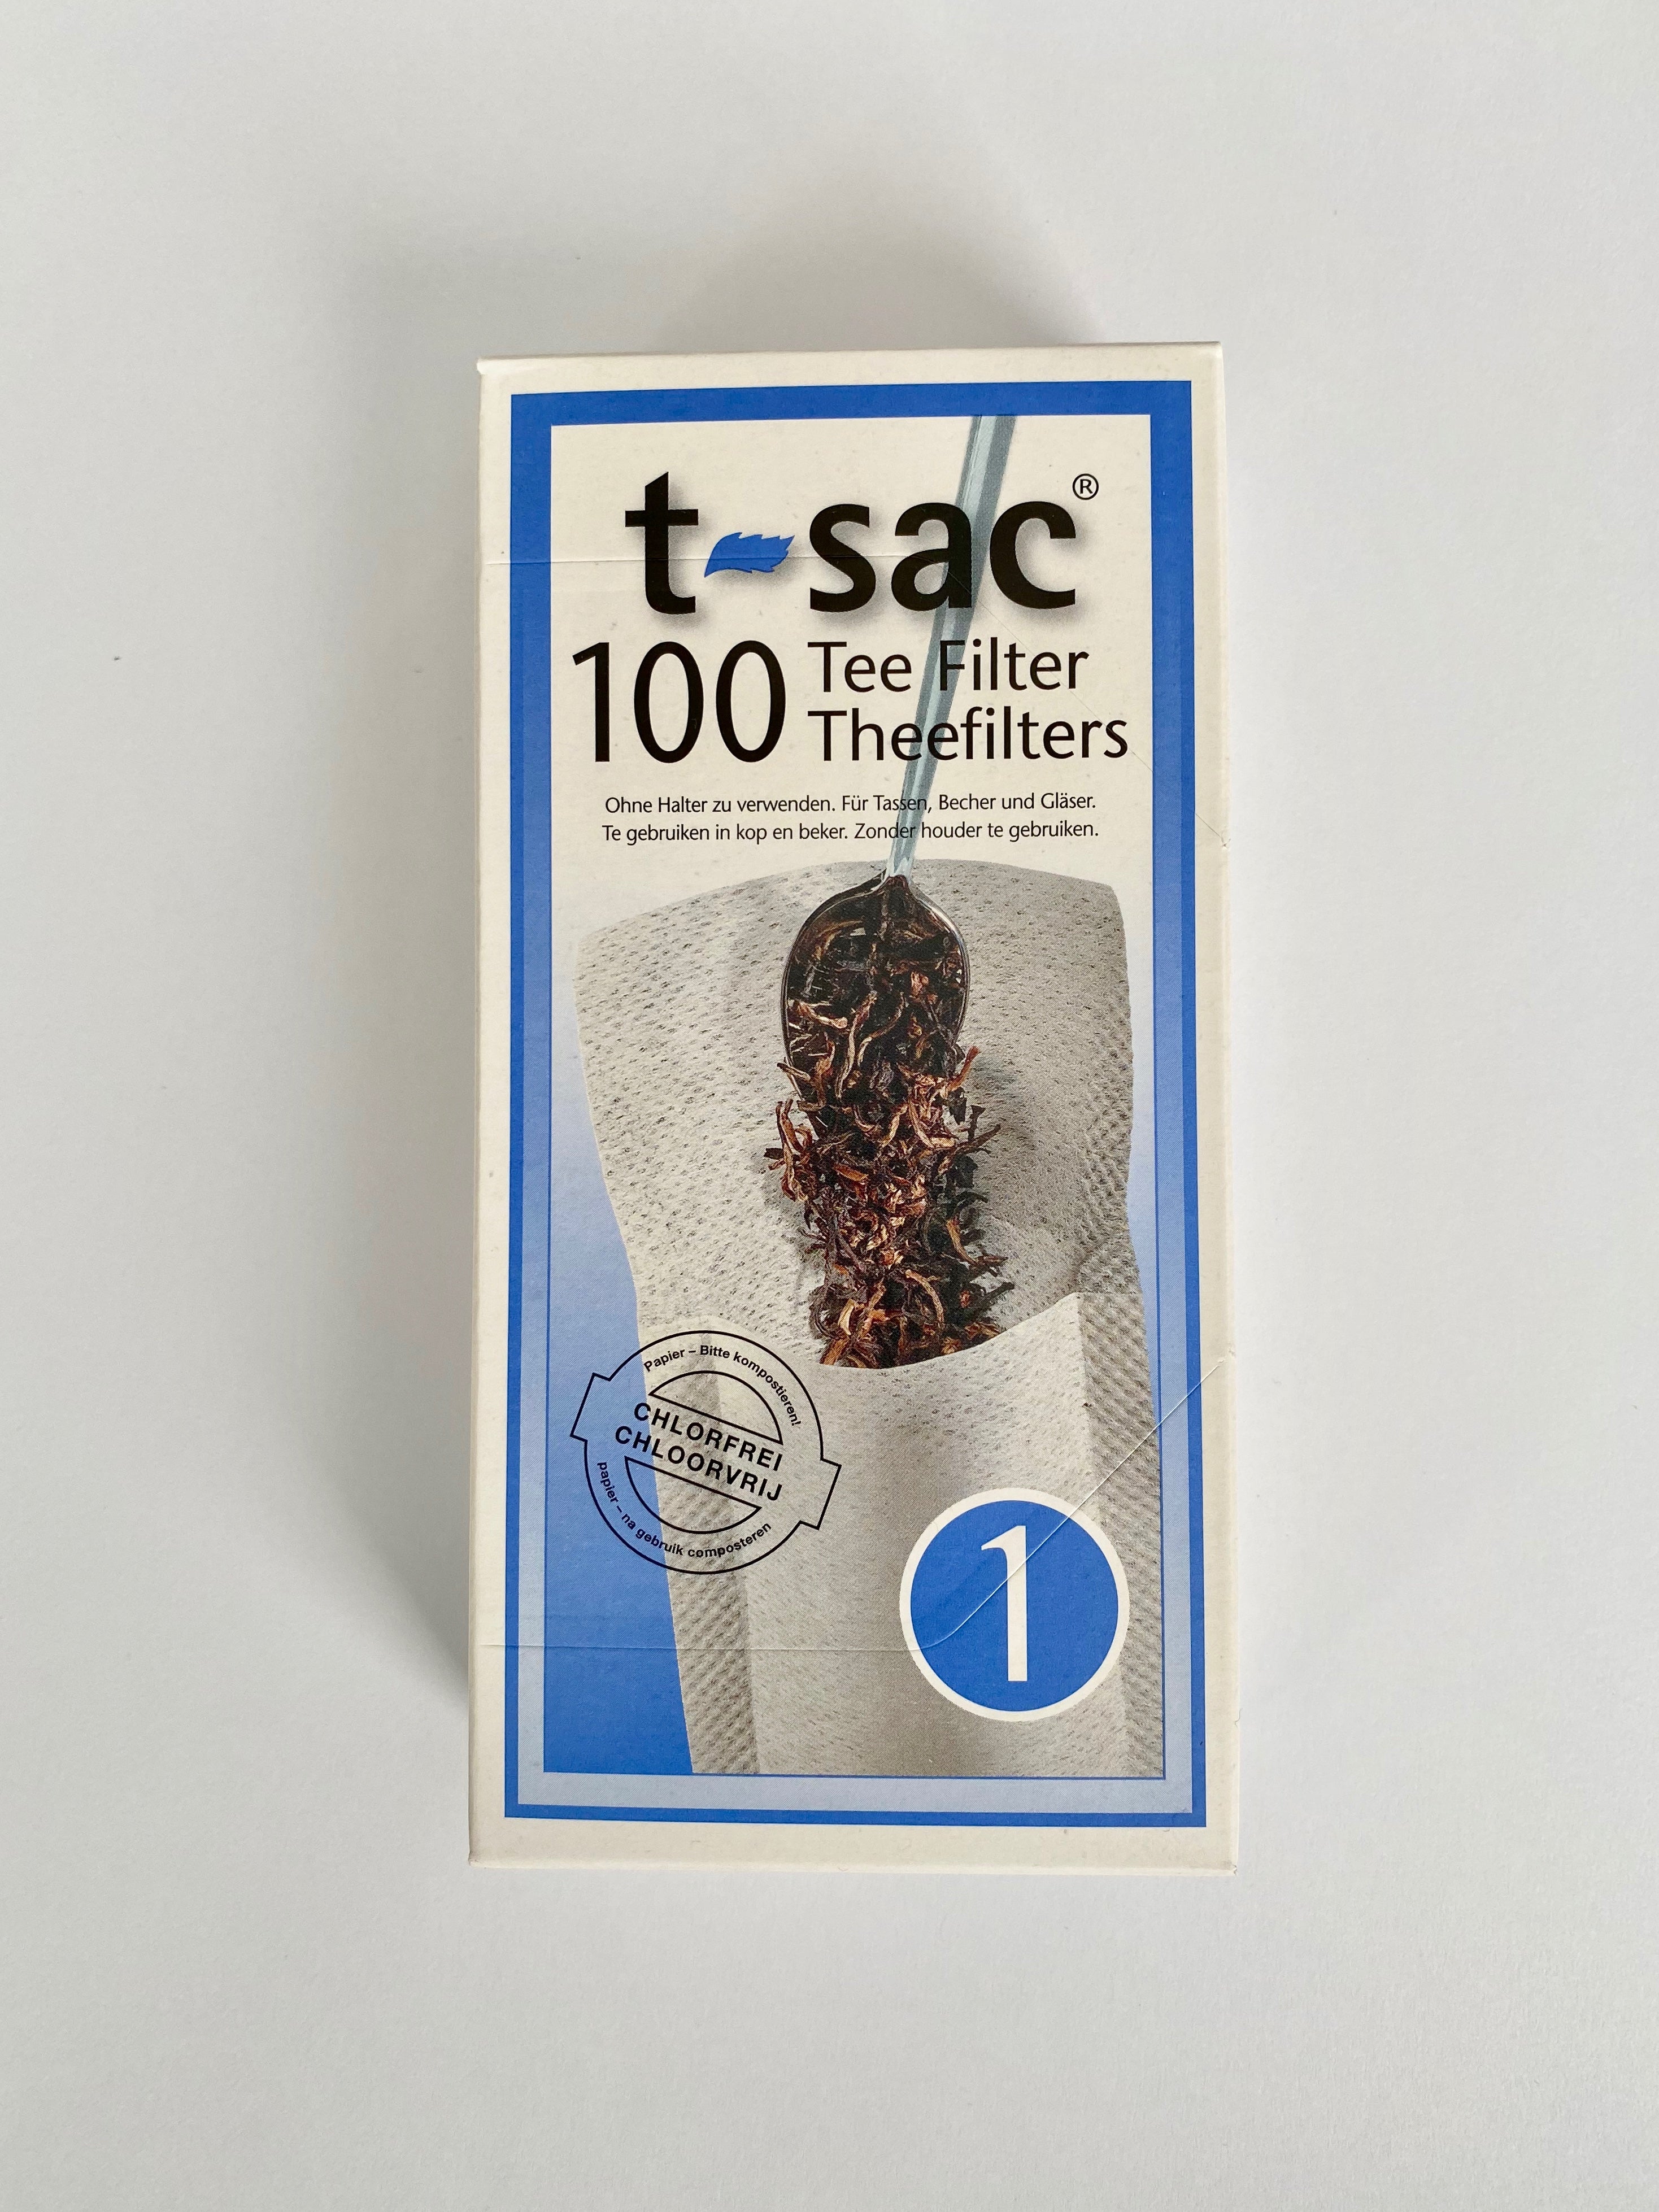 Paper Filters - Teacup Size (Box of 100)